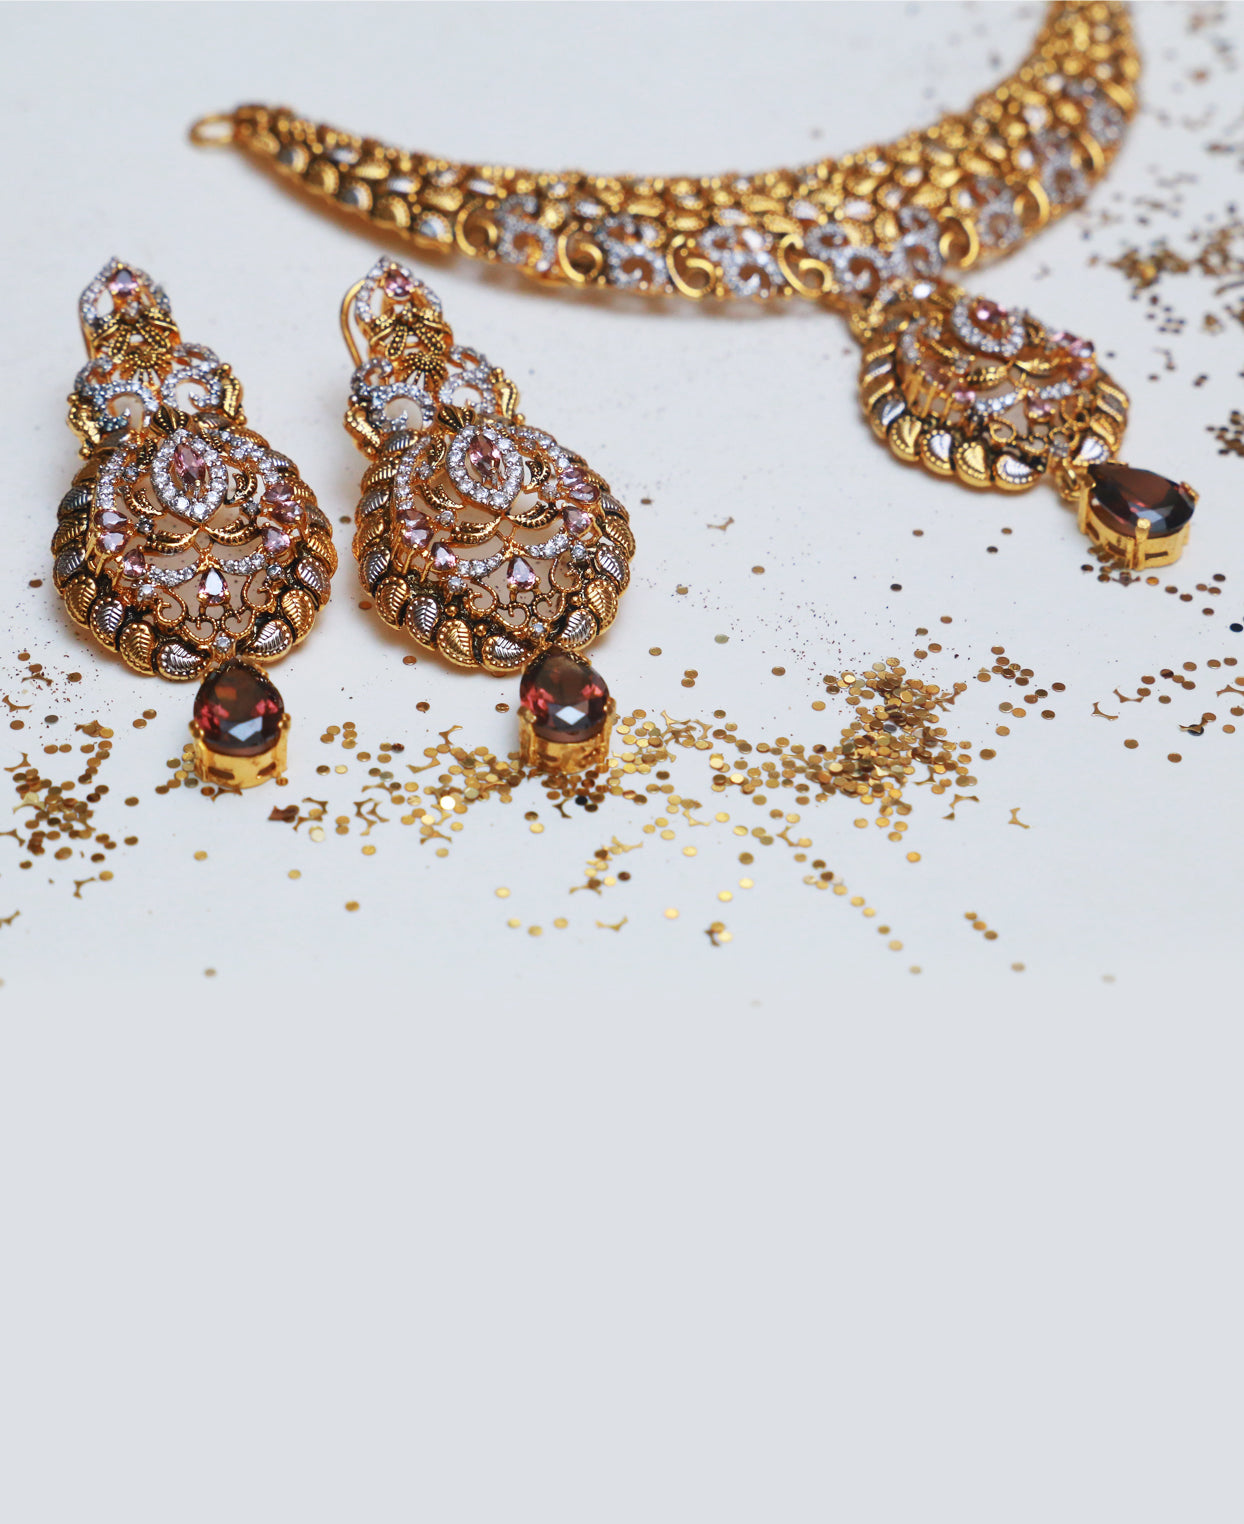 The Intricate Gold Set